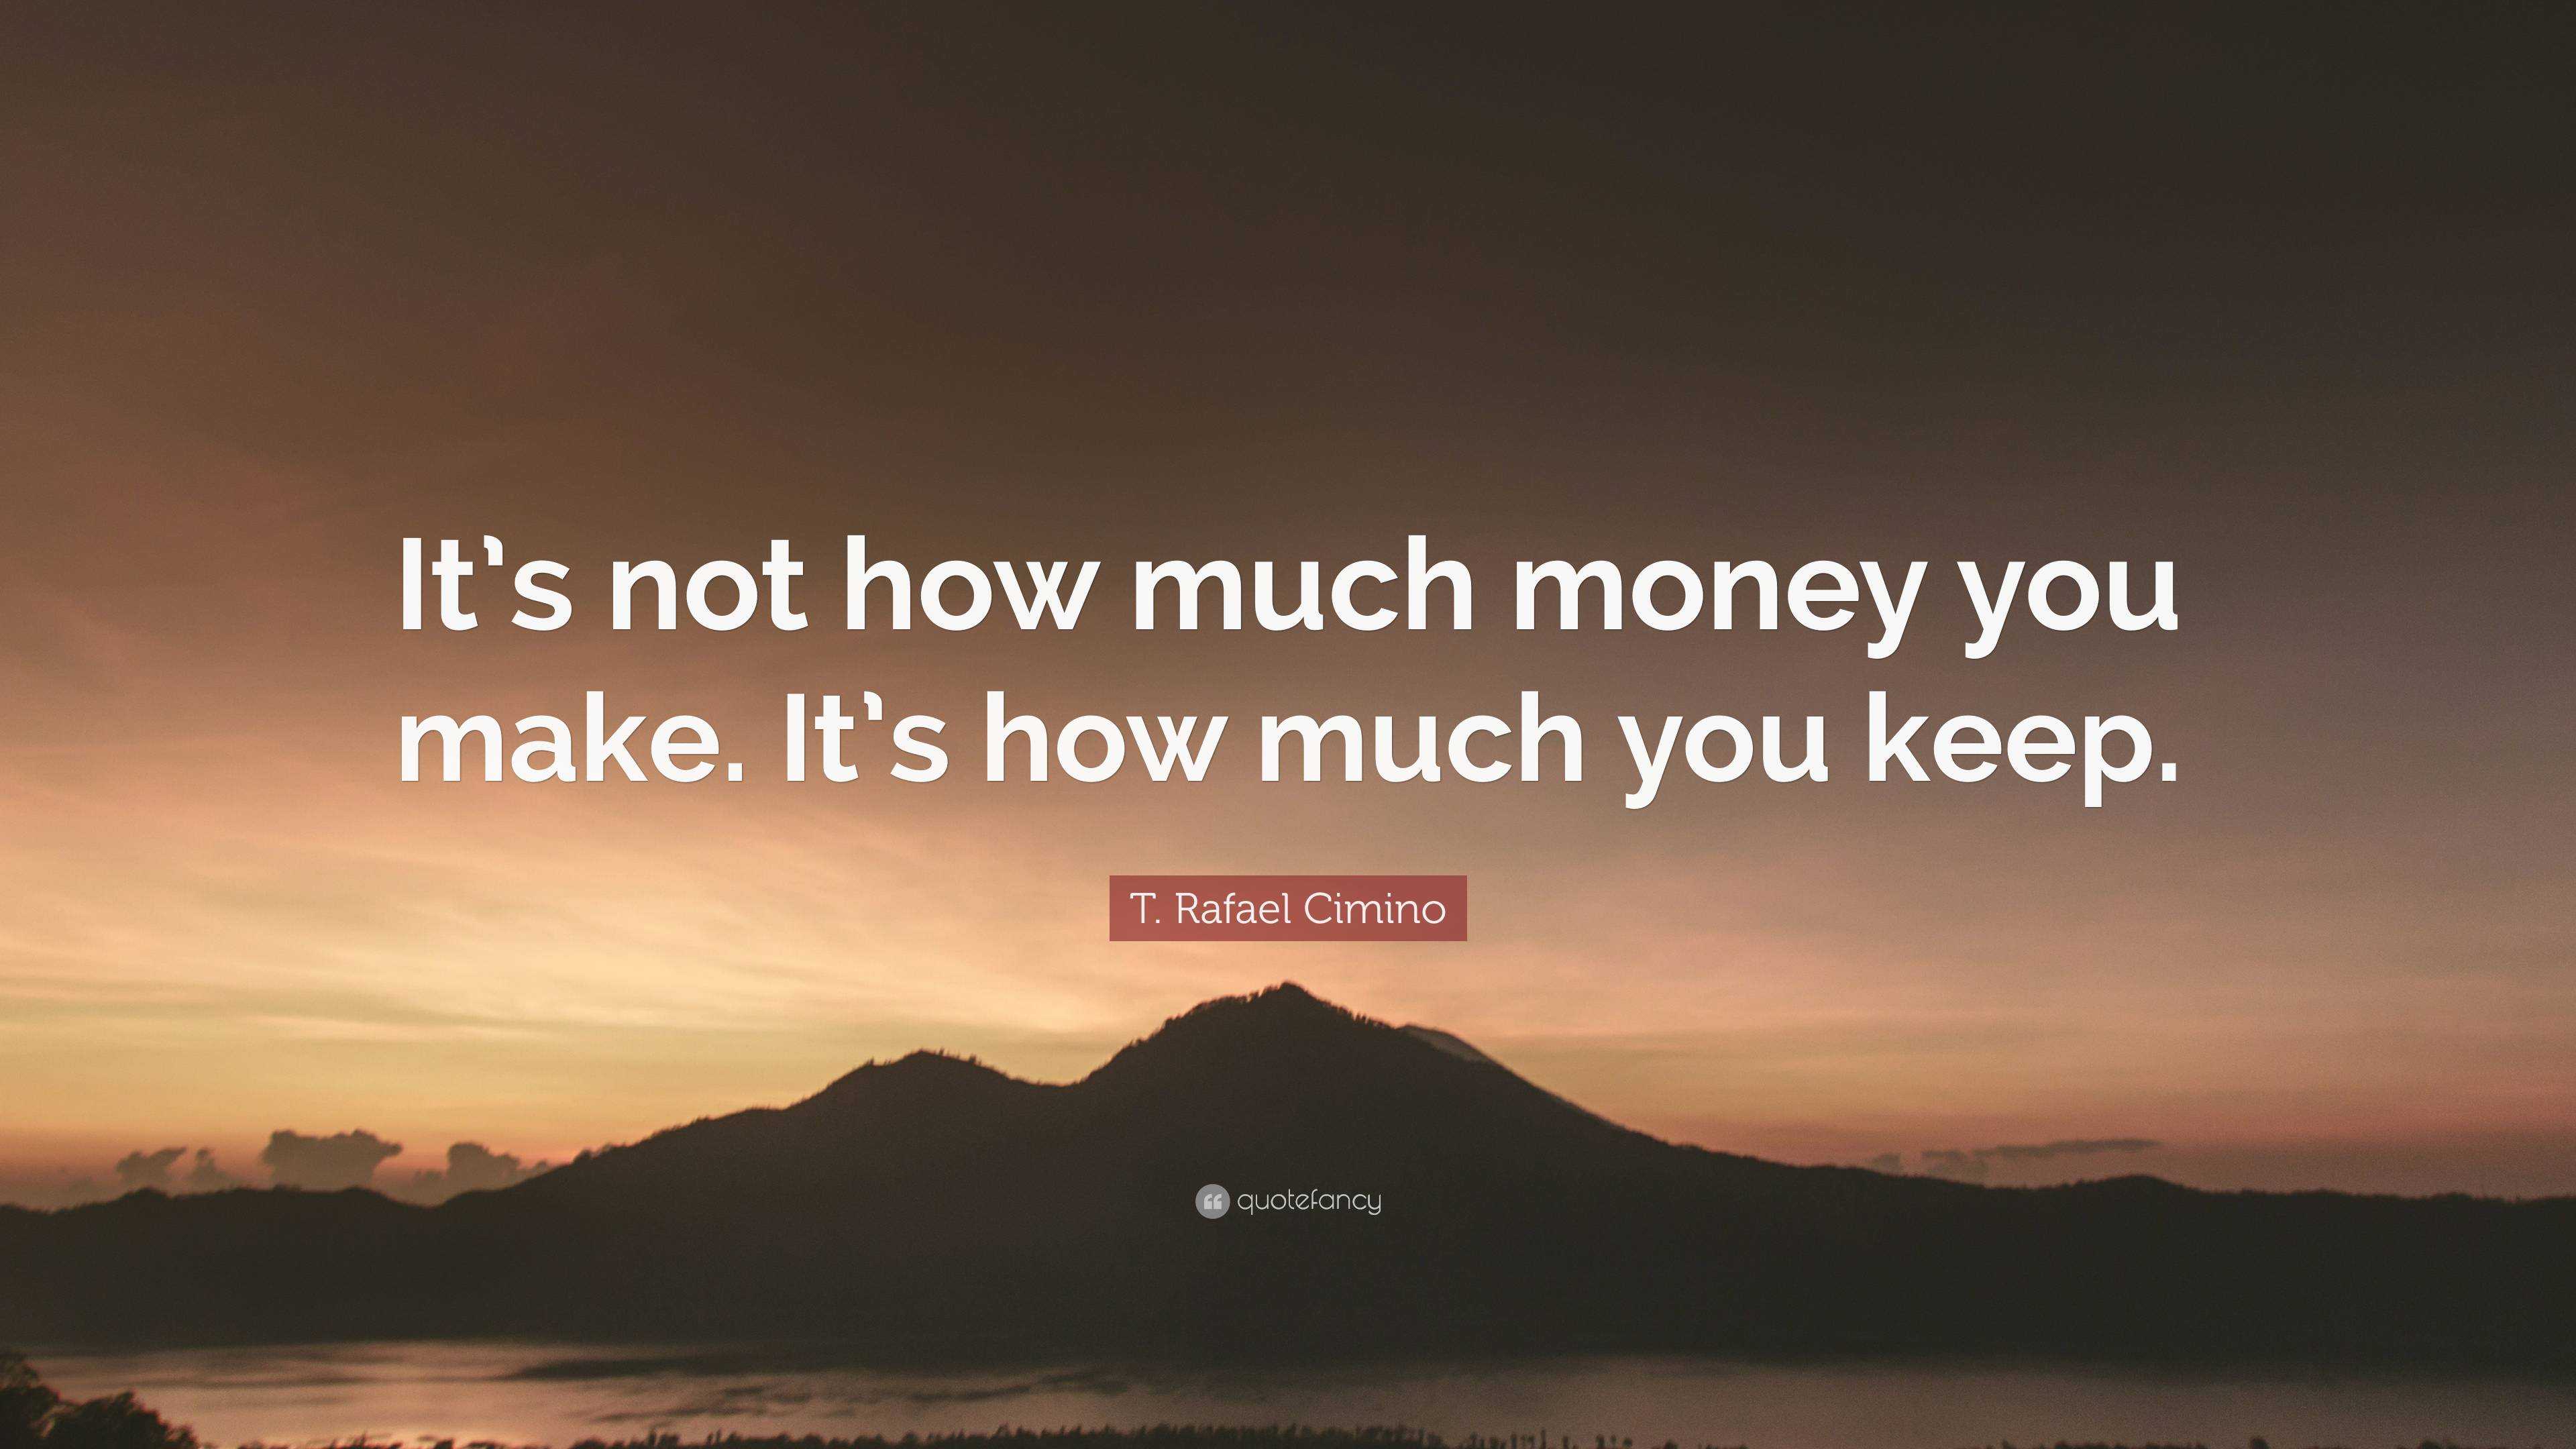 T Rafael Cimino Quote “its Not How Much Money You Make Its How Much You Keep” 5970